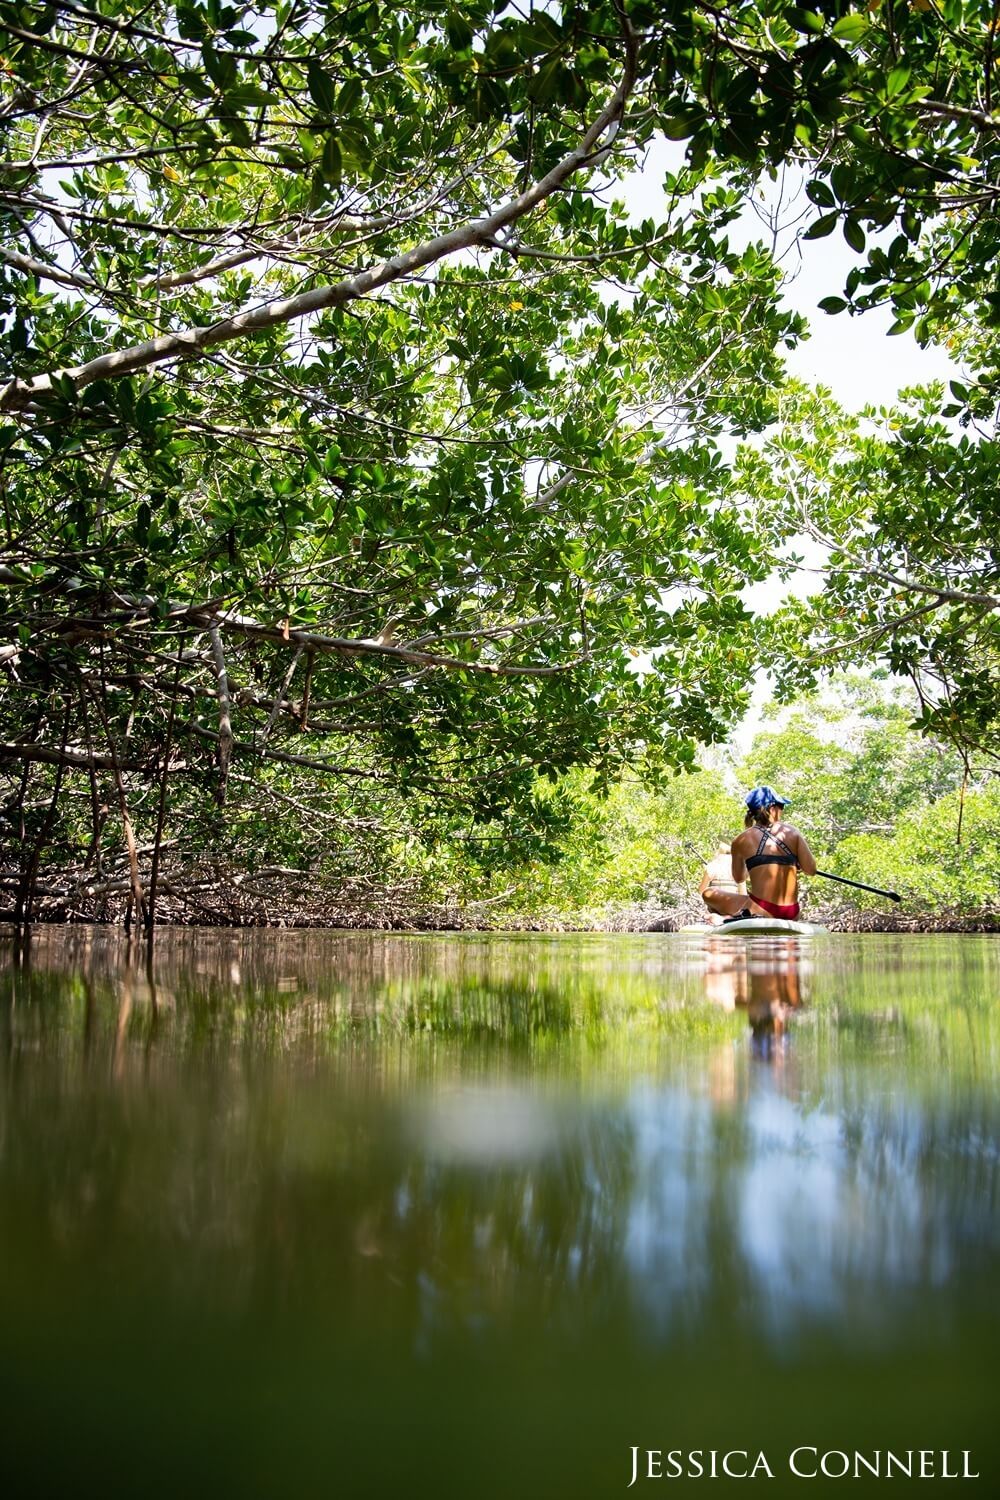 Woman sitting on padde board on the water surrounded by mangroves.